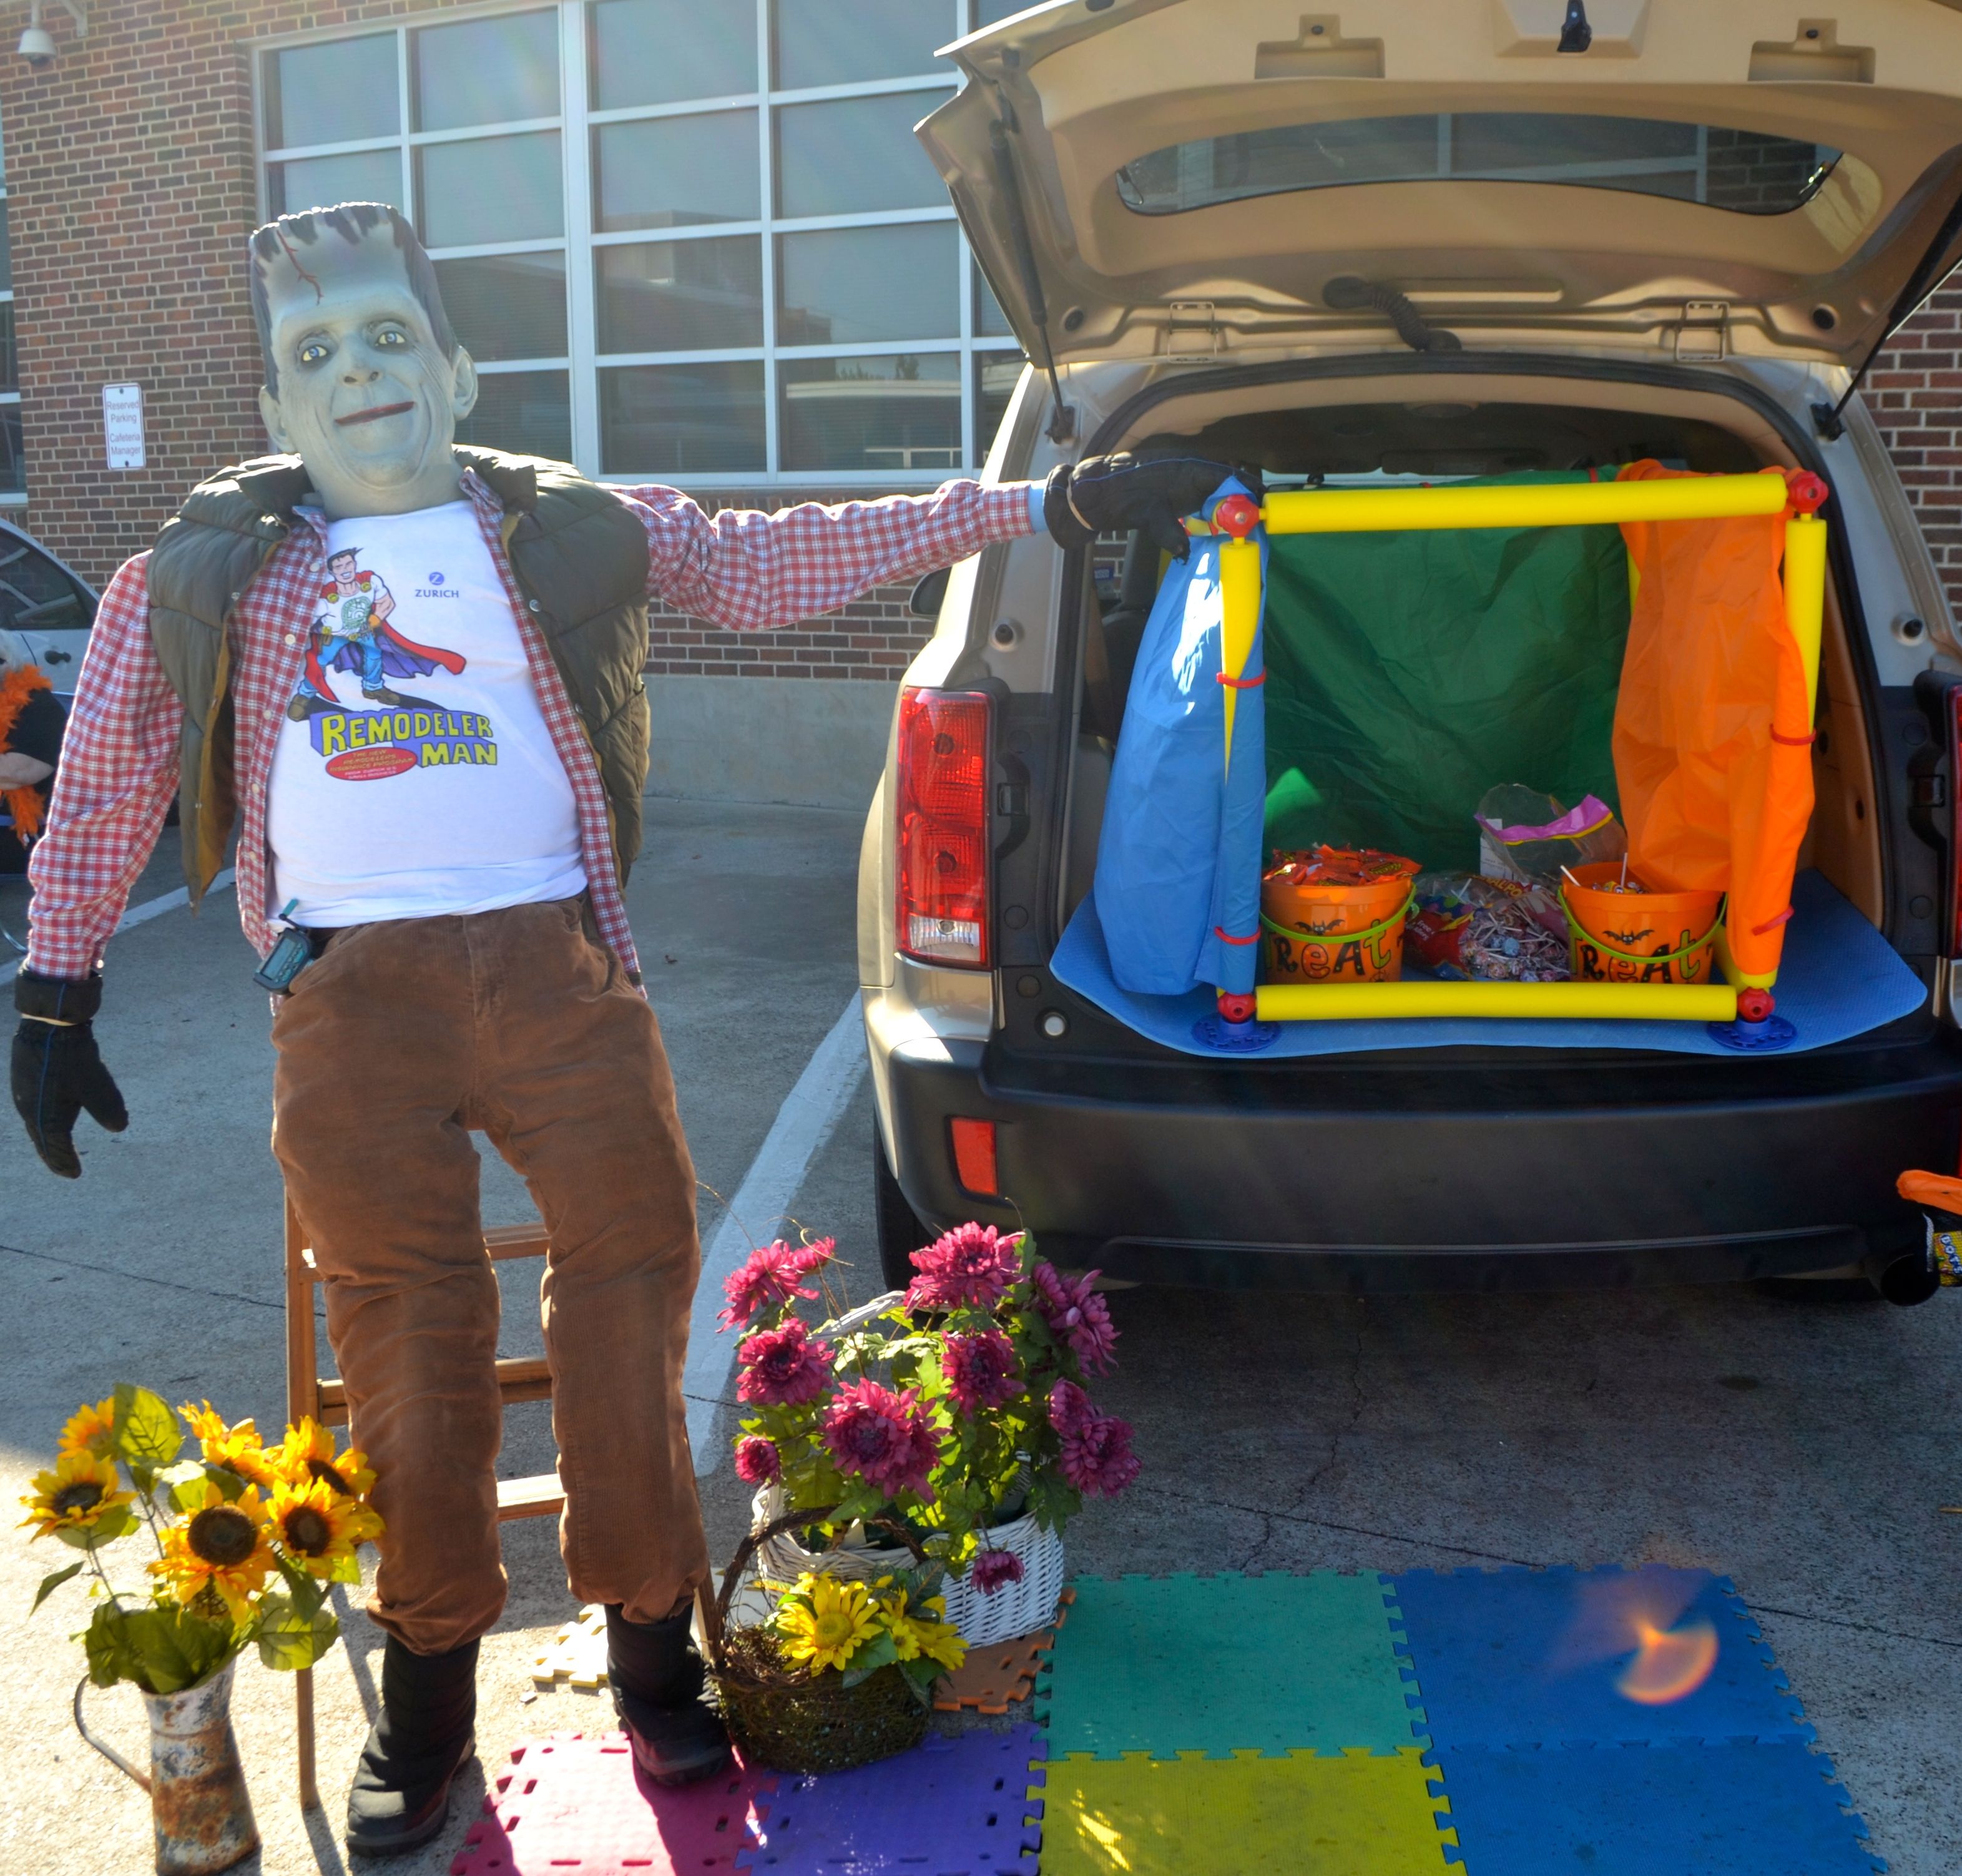 Trunk or Treat 11